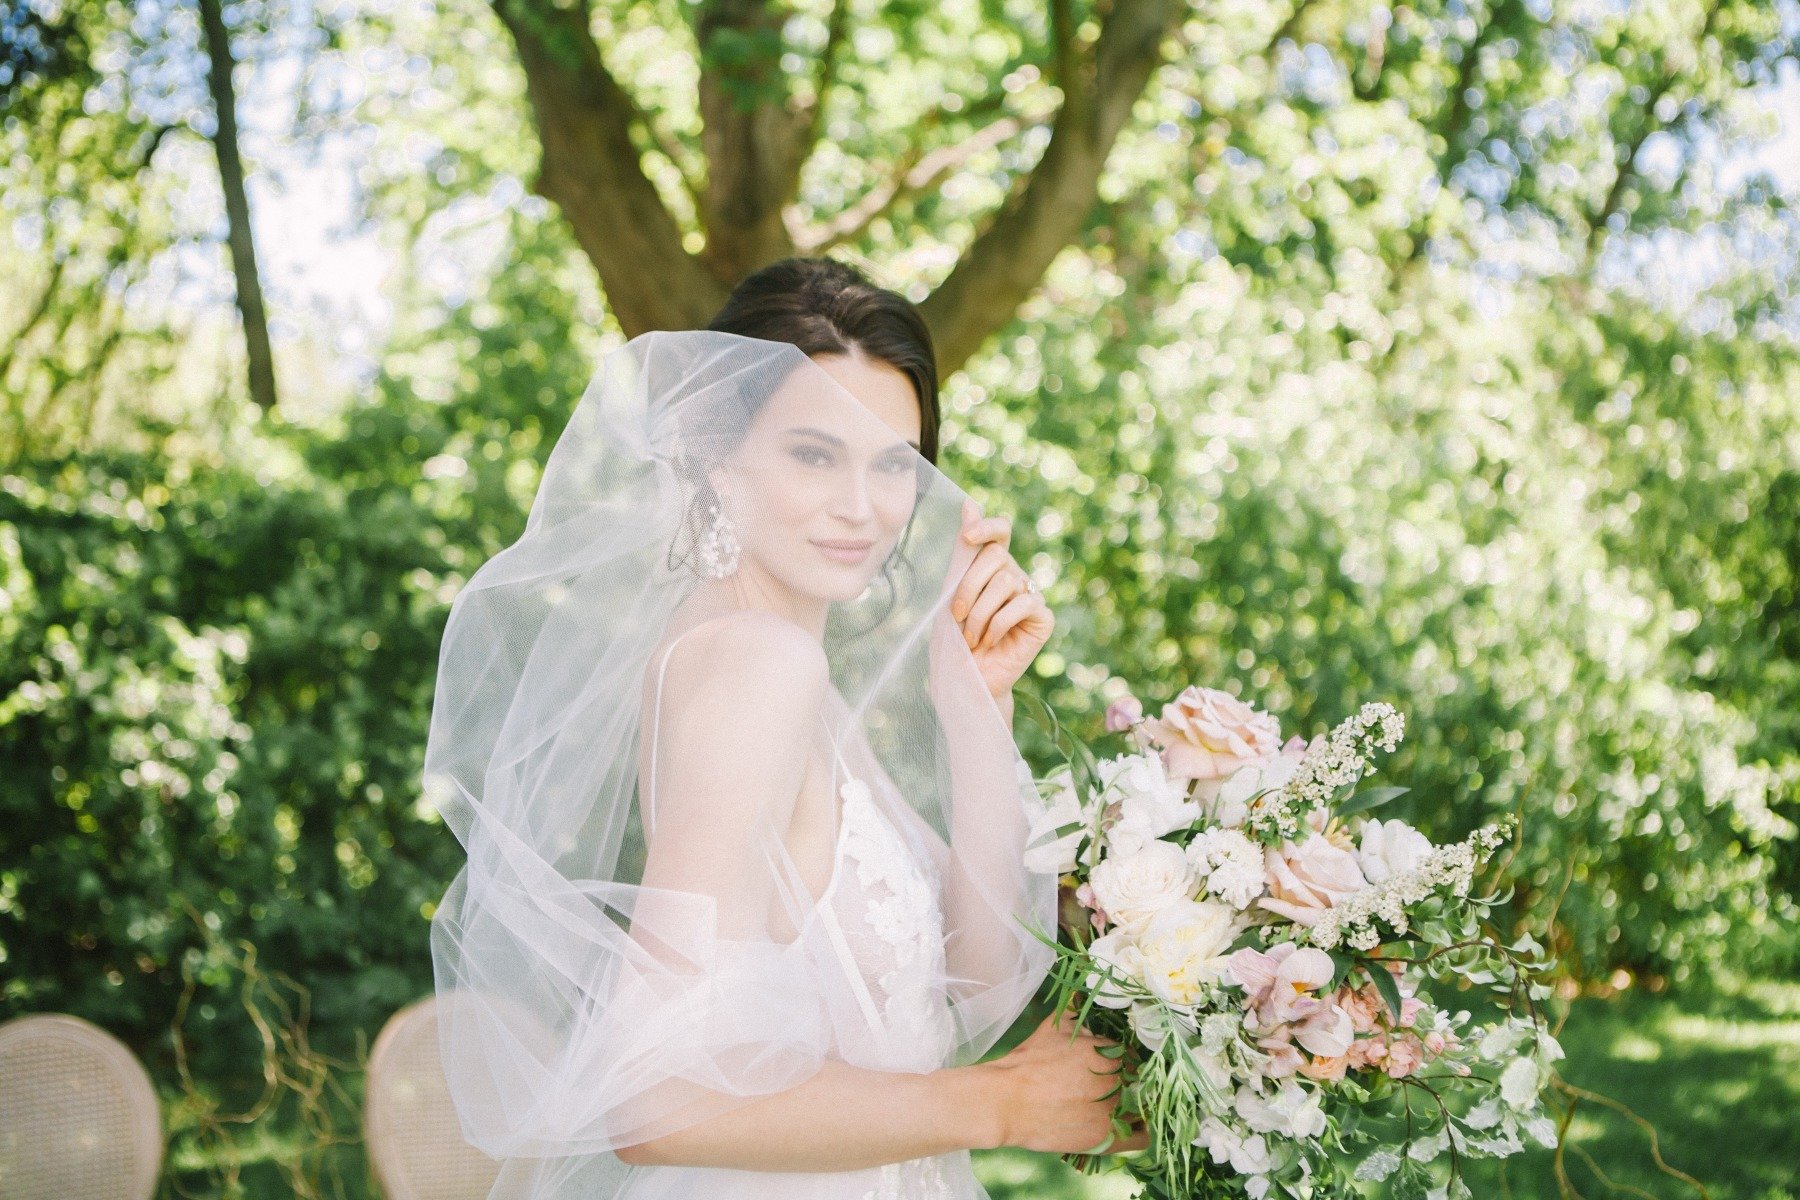 chic tulle veil by Laura Jayne